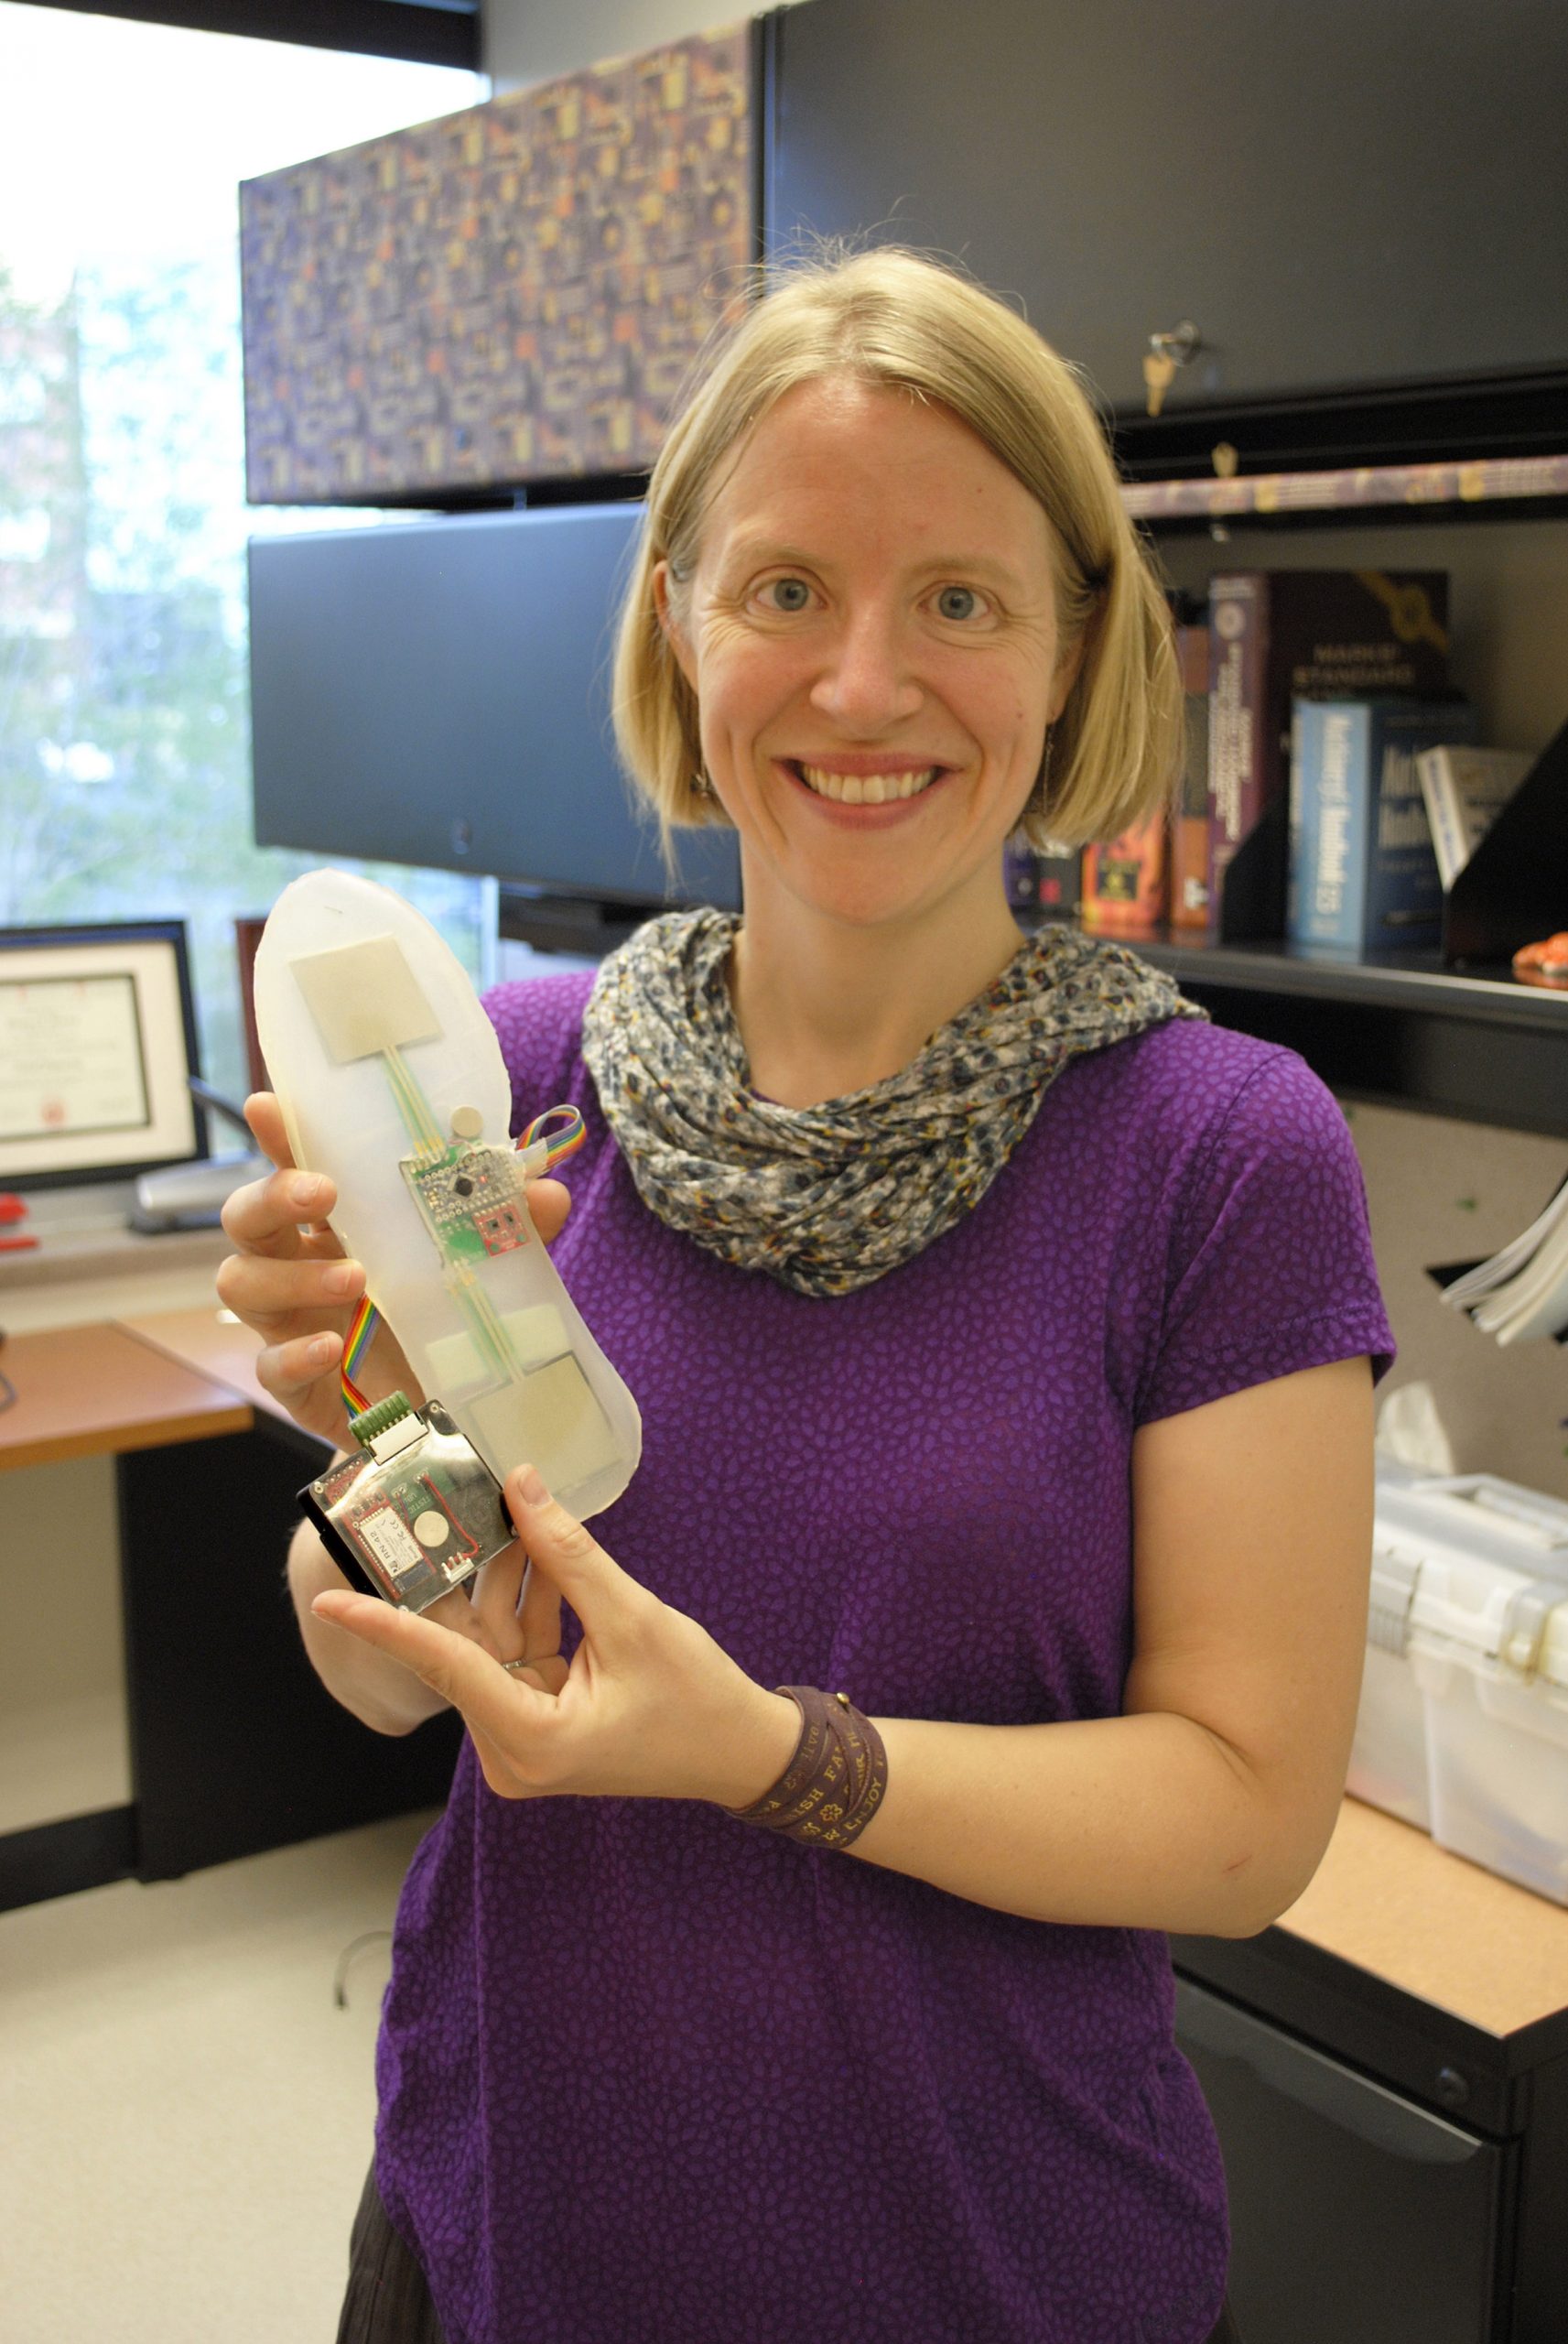 University of Utah Engineering Professor Stacy Bamberg ‘s Rapid Rehab system. It measures foot movement using accelerometers and gyroscopes, and provides feedback wirelessly through a smartphone application.